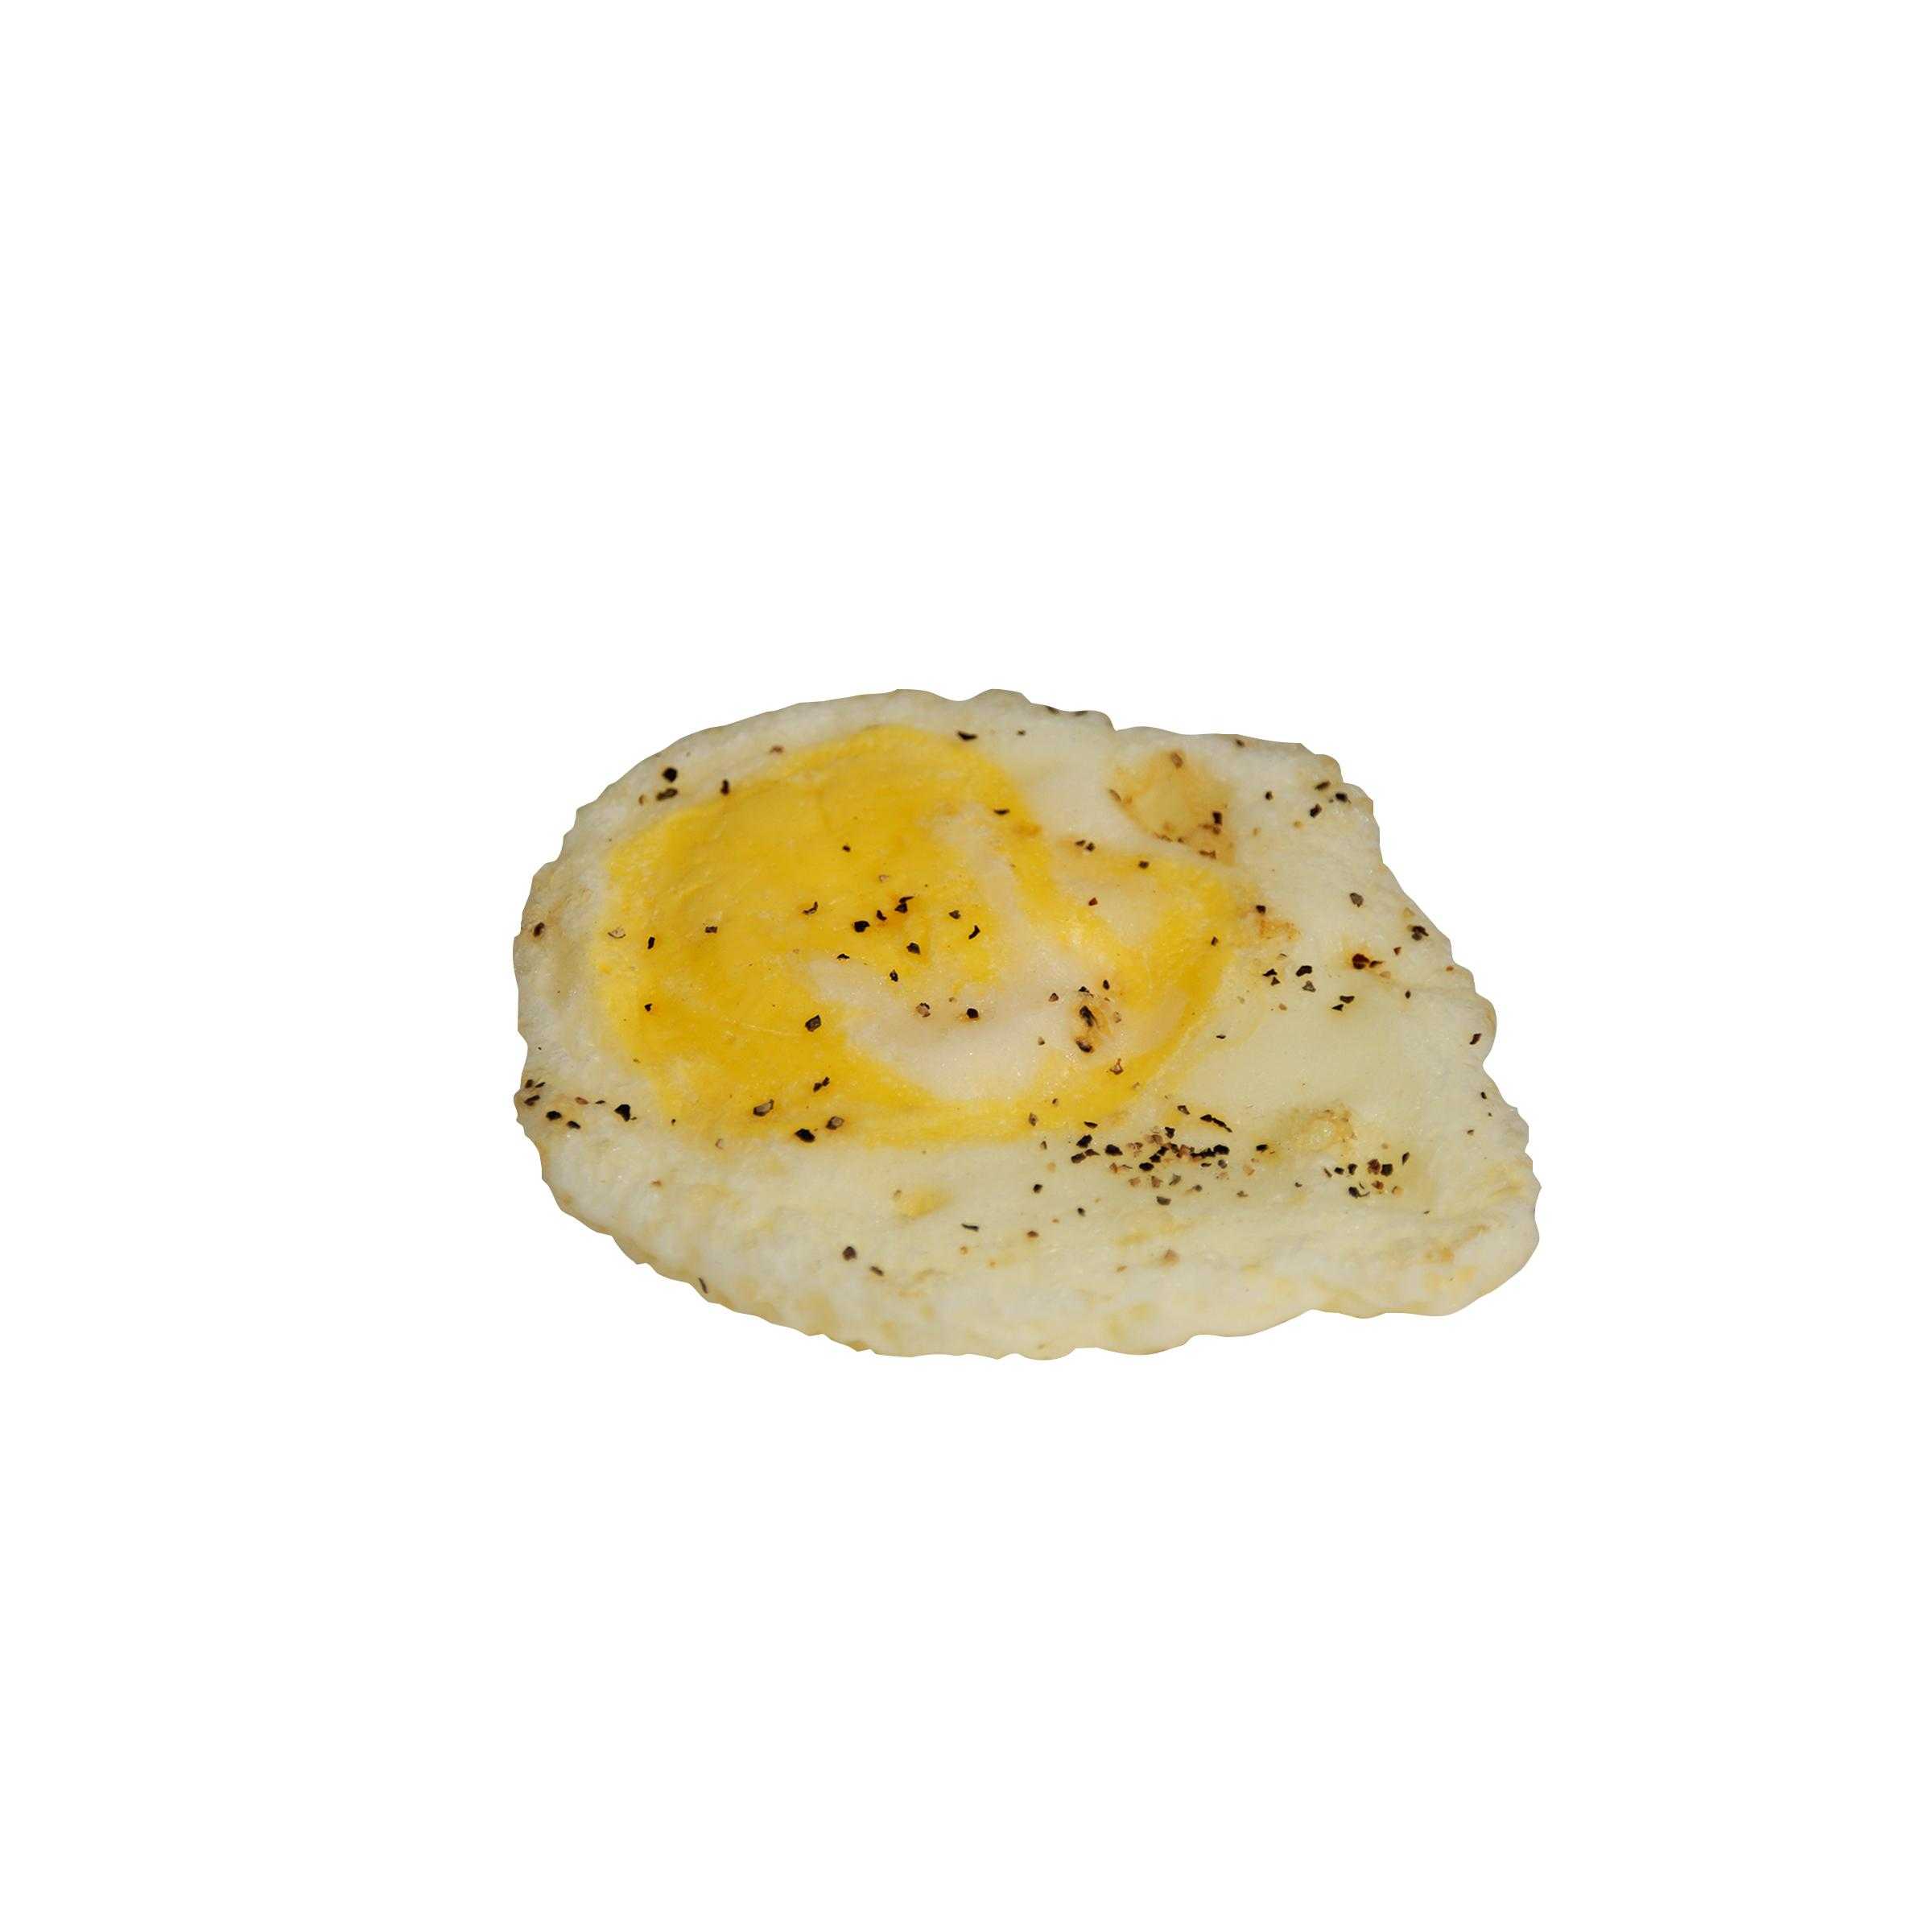 Abbotsford Farms® American Humane Certified Cage Free Home-Style Fried Egg with Cracked Black Pepper, 168/1.5 oz